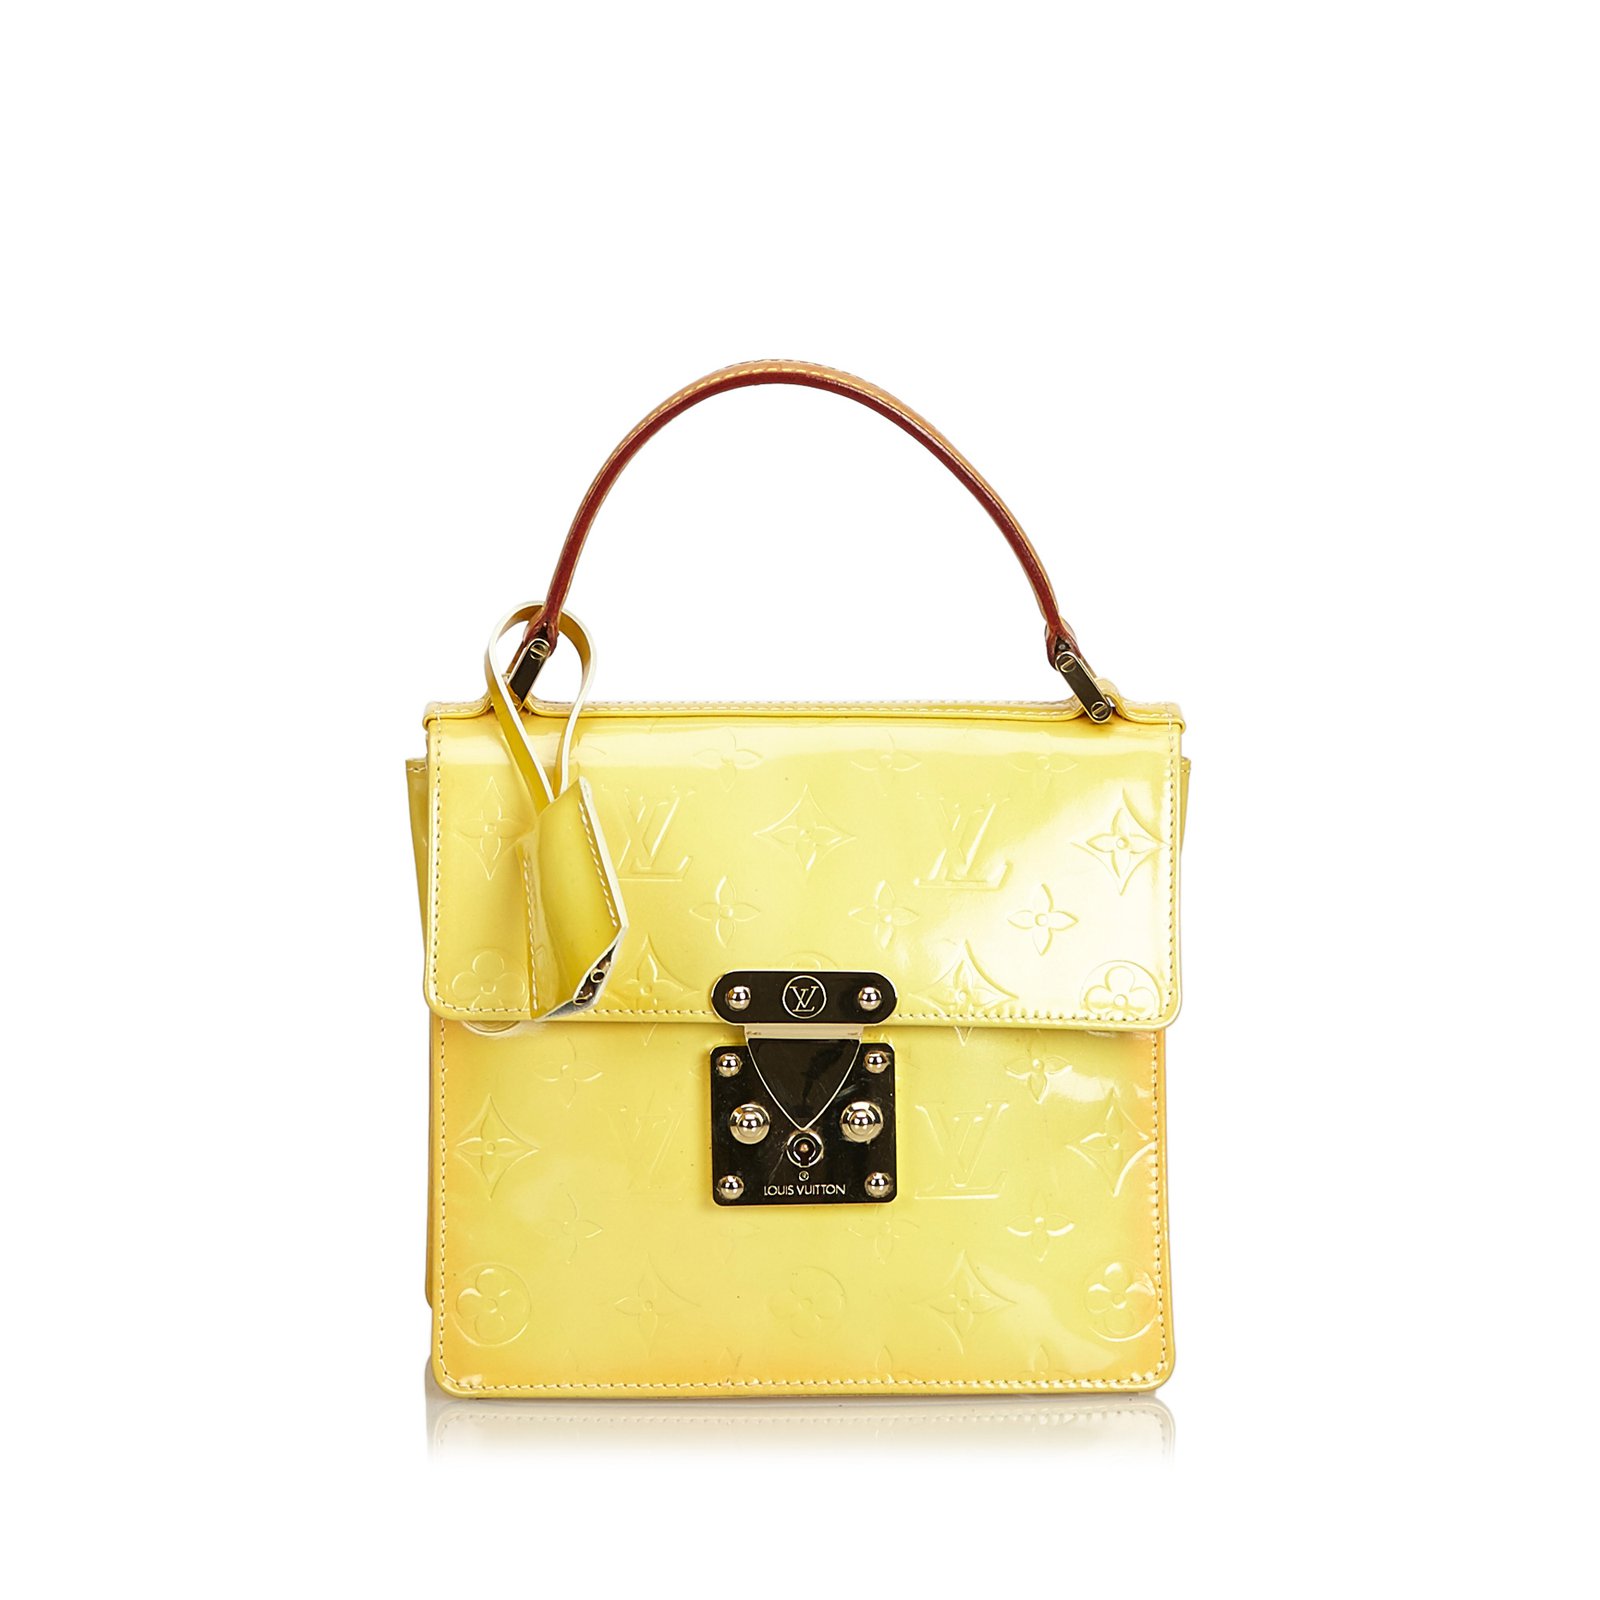 Louis Vuitton - Authenticated Pont Neuf Handbag - Leather Yellow for Women, Good Condition